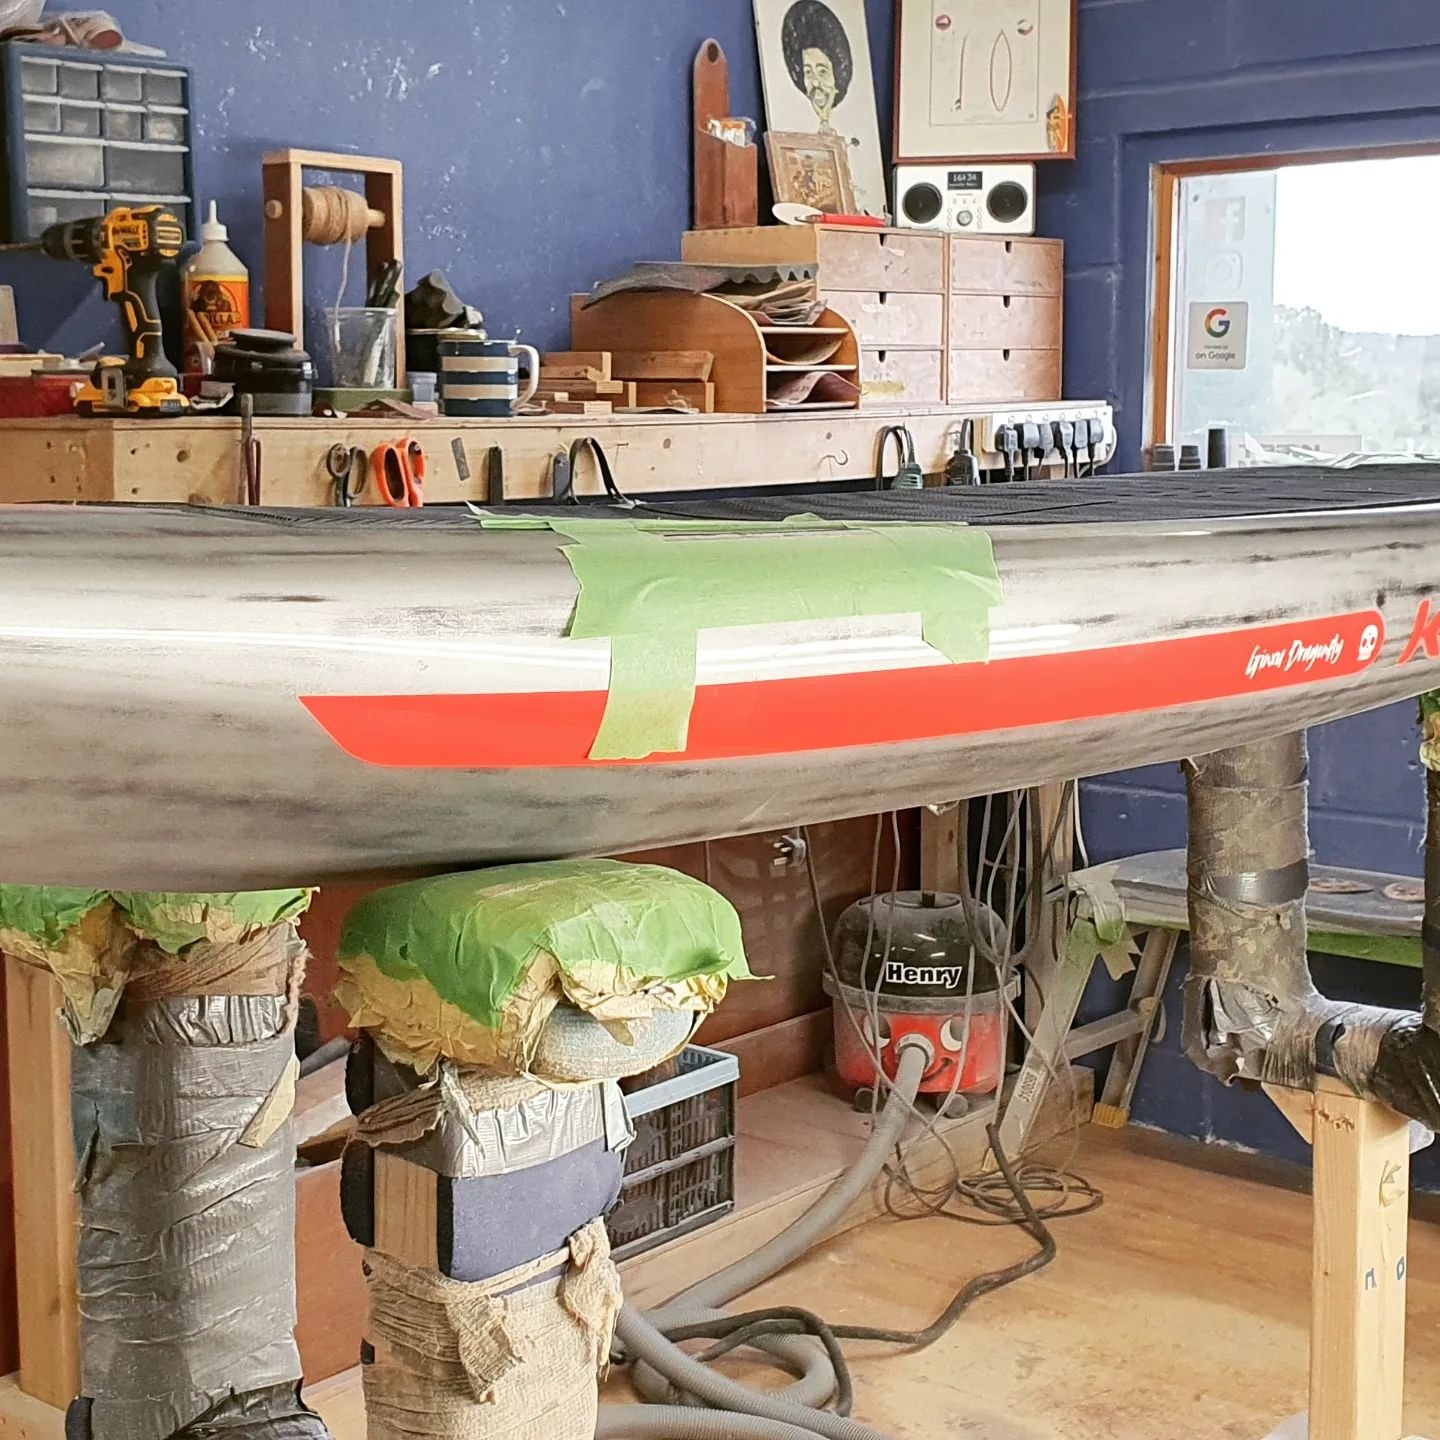 Impact damage on the upper rail of this KT foil.
.
Split section with a good bit of trapped water and a little delamination. 
.
Sorted 👍
.
#mcwatersports #boardrepairshop #boardrepairs #brokenrail #water #delamination #restored #happy #henryhoover #